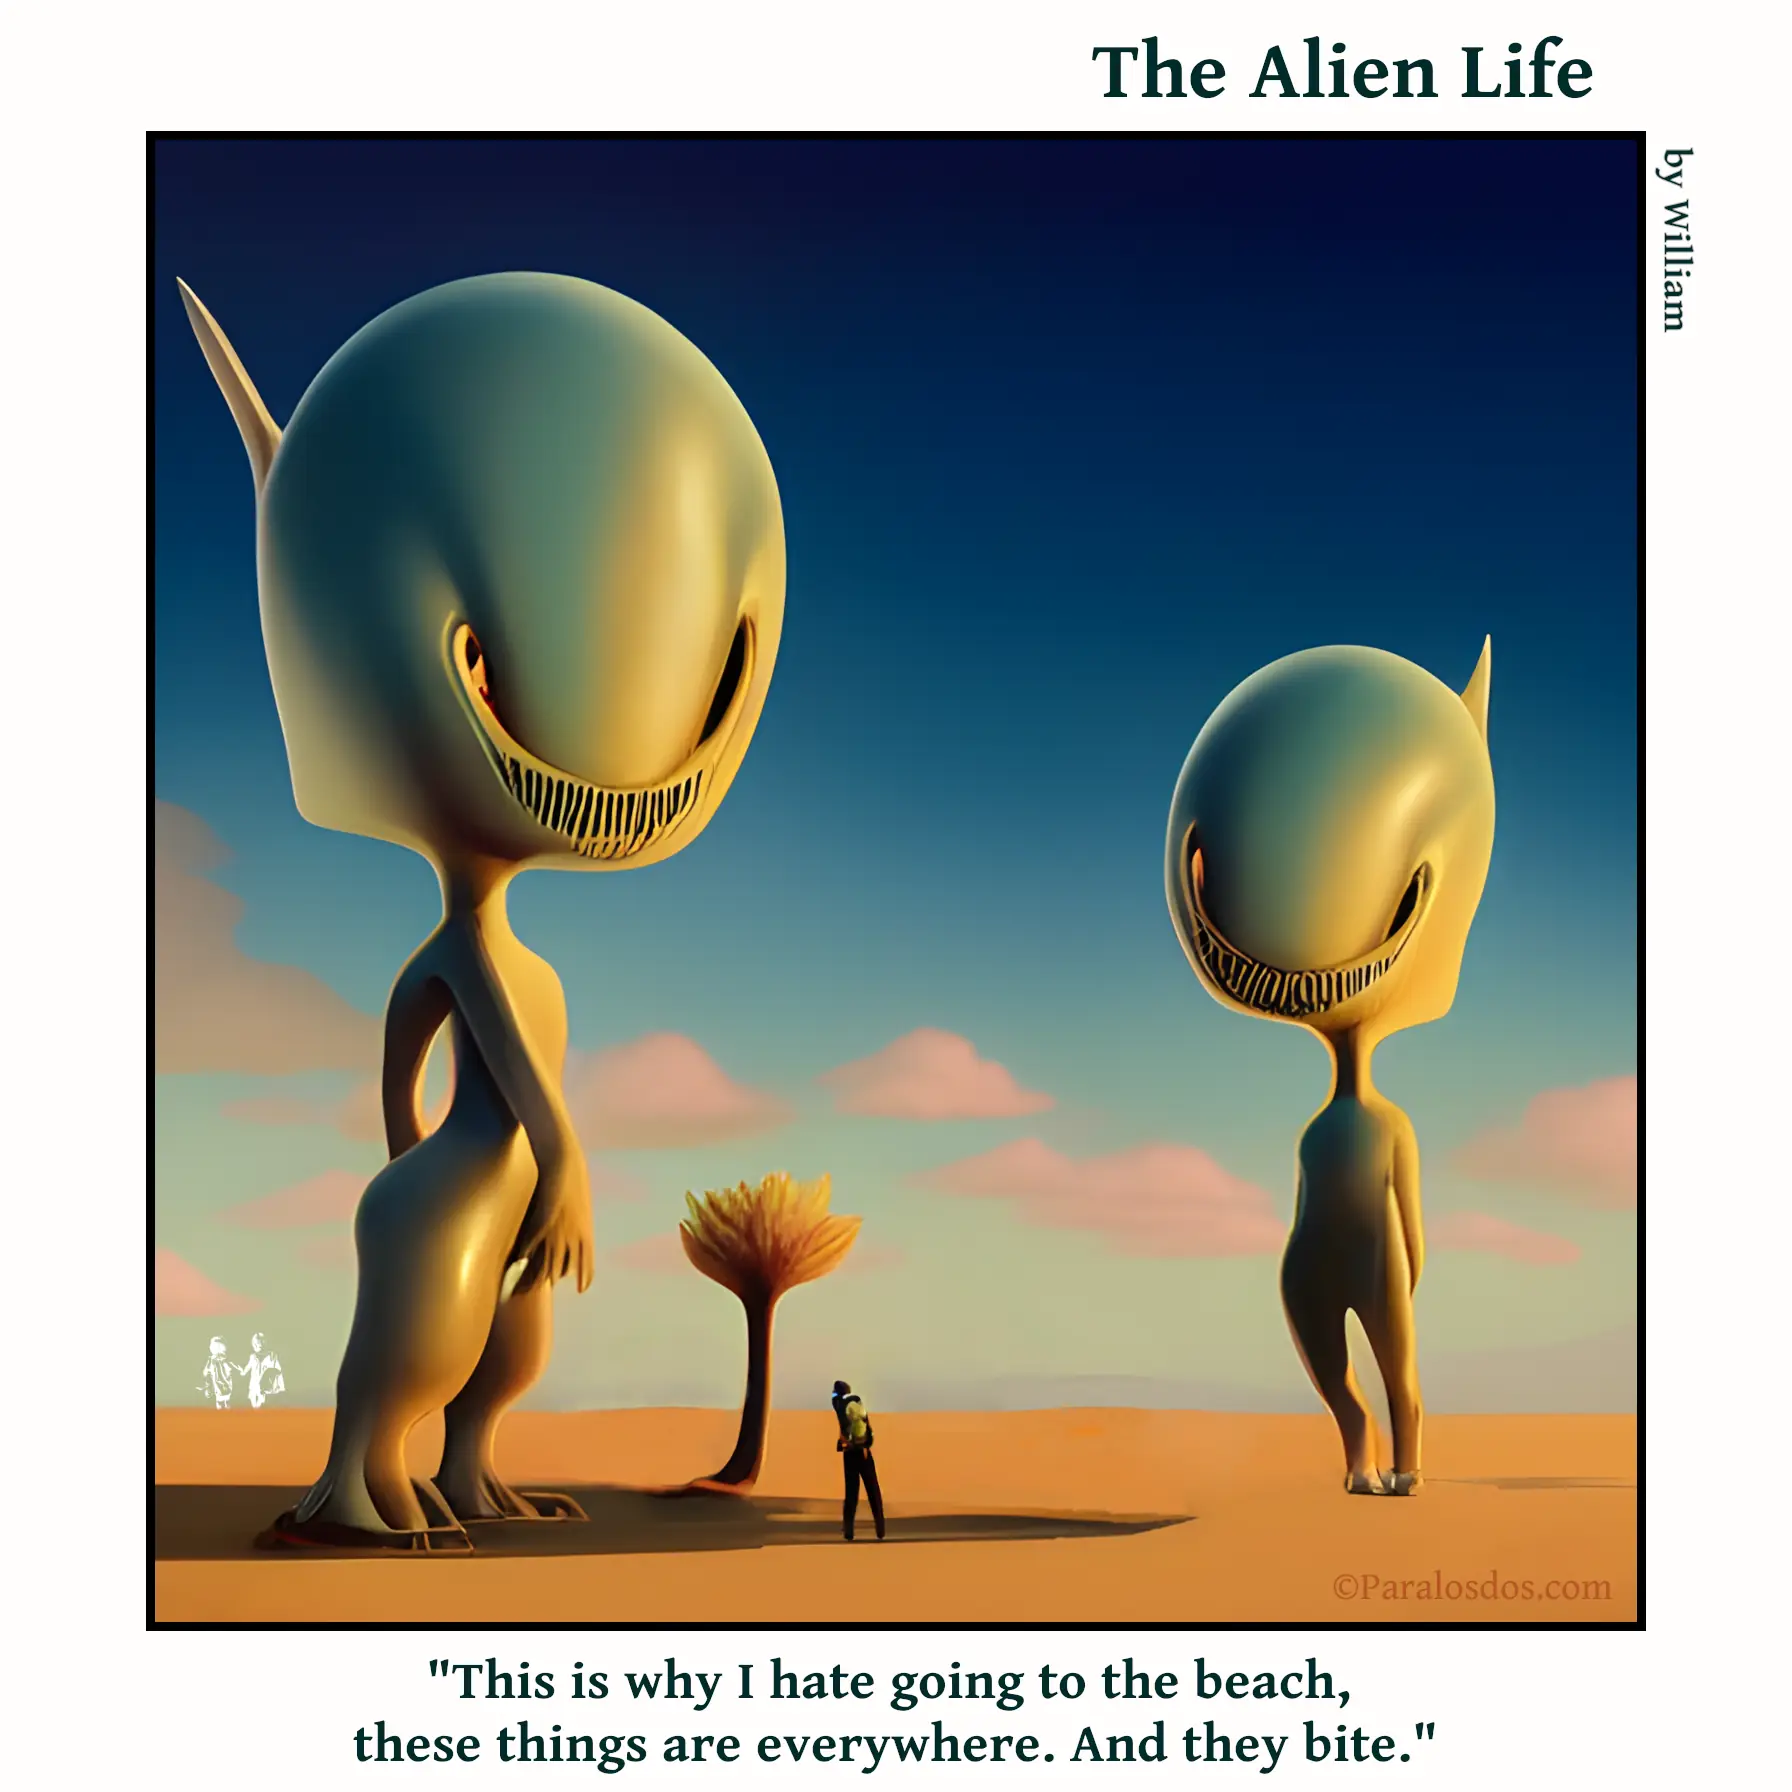 The Alien Life, one panel Comic. Two huge aliens with sharp teeth are standing on the beach.Between them, at about mid shin height, is a human. The caption reads: "This is why I hate going to the beach, these things are everywhere. And they bite."